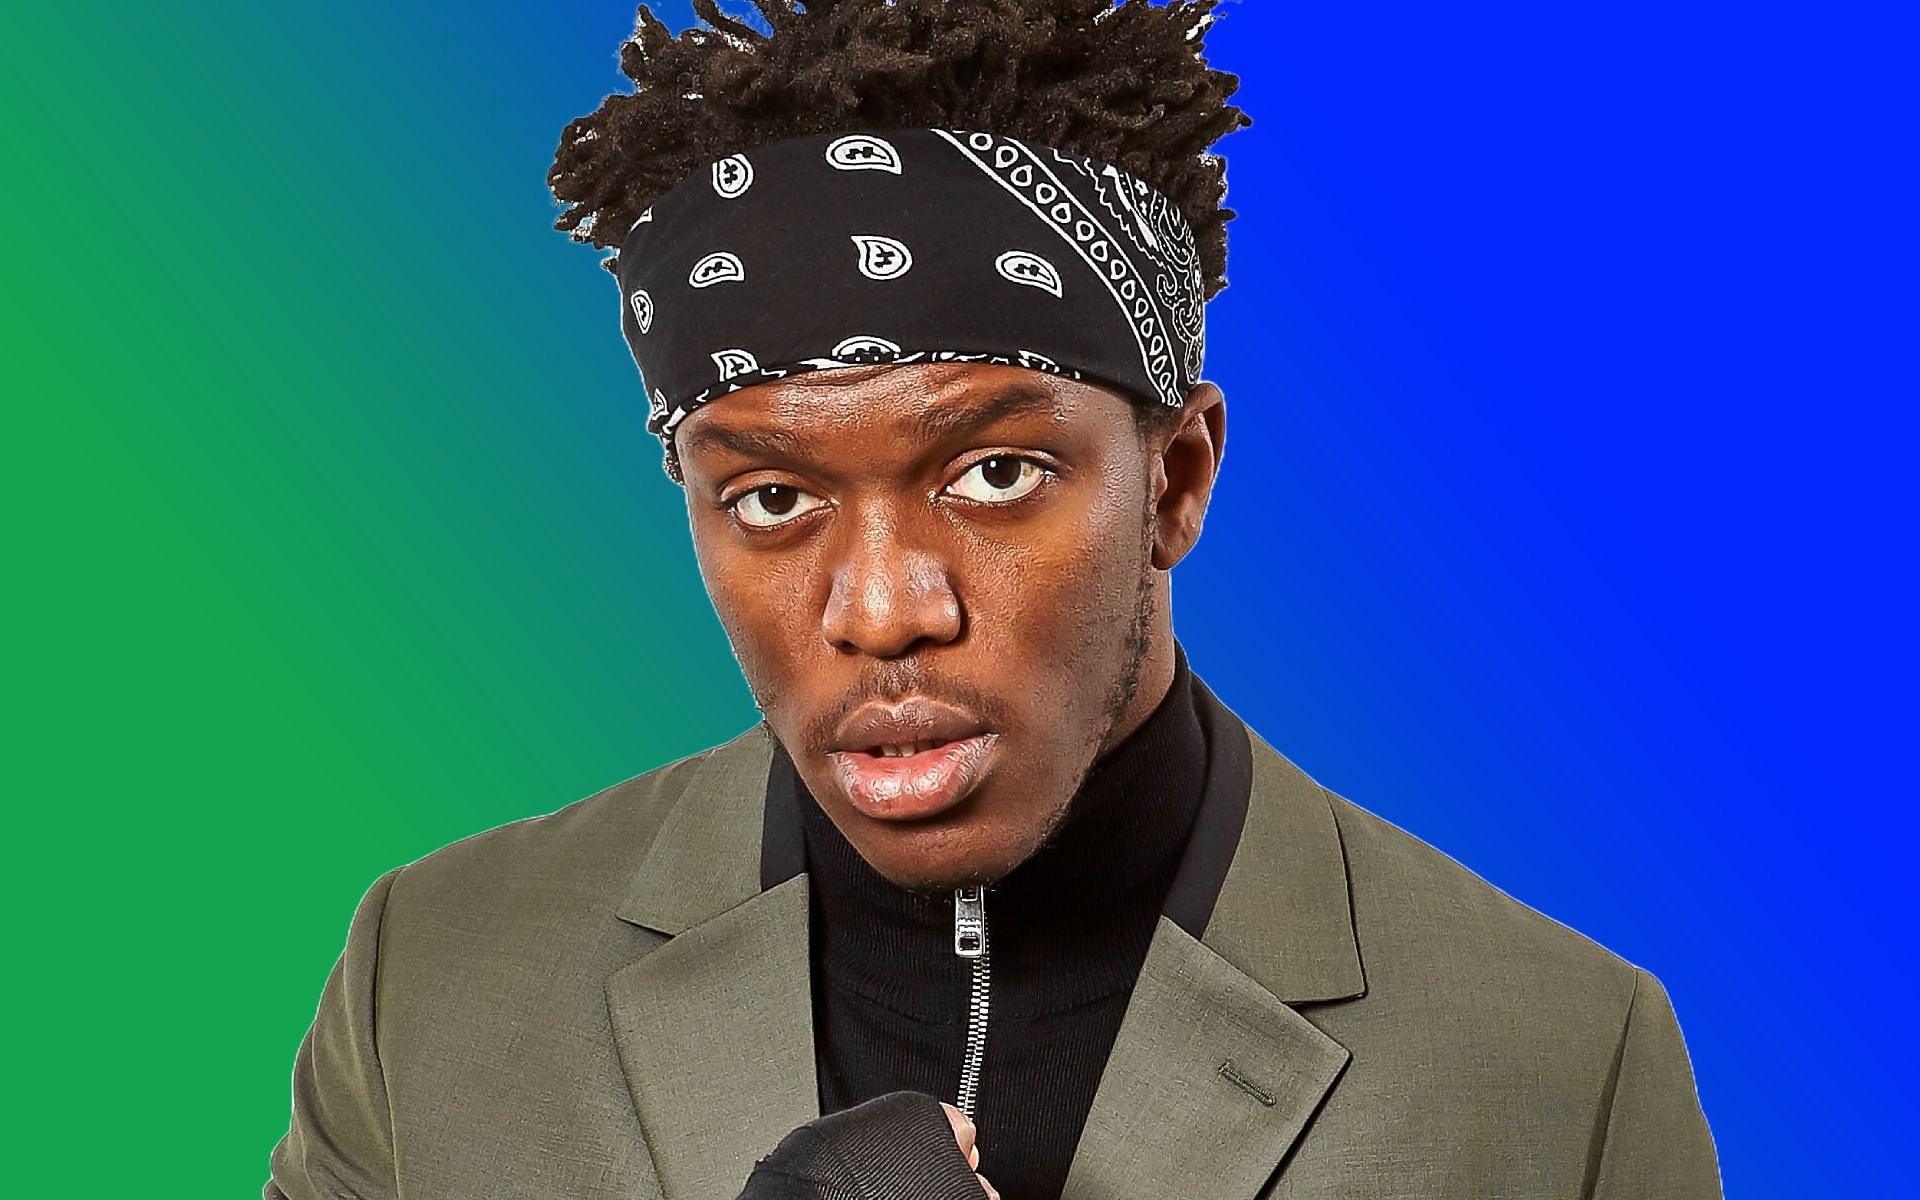 KSI found himself in hot water after posting a controversial tweet (Image via the Music Connection Magazine and Sportskeeda)